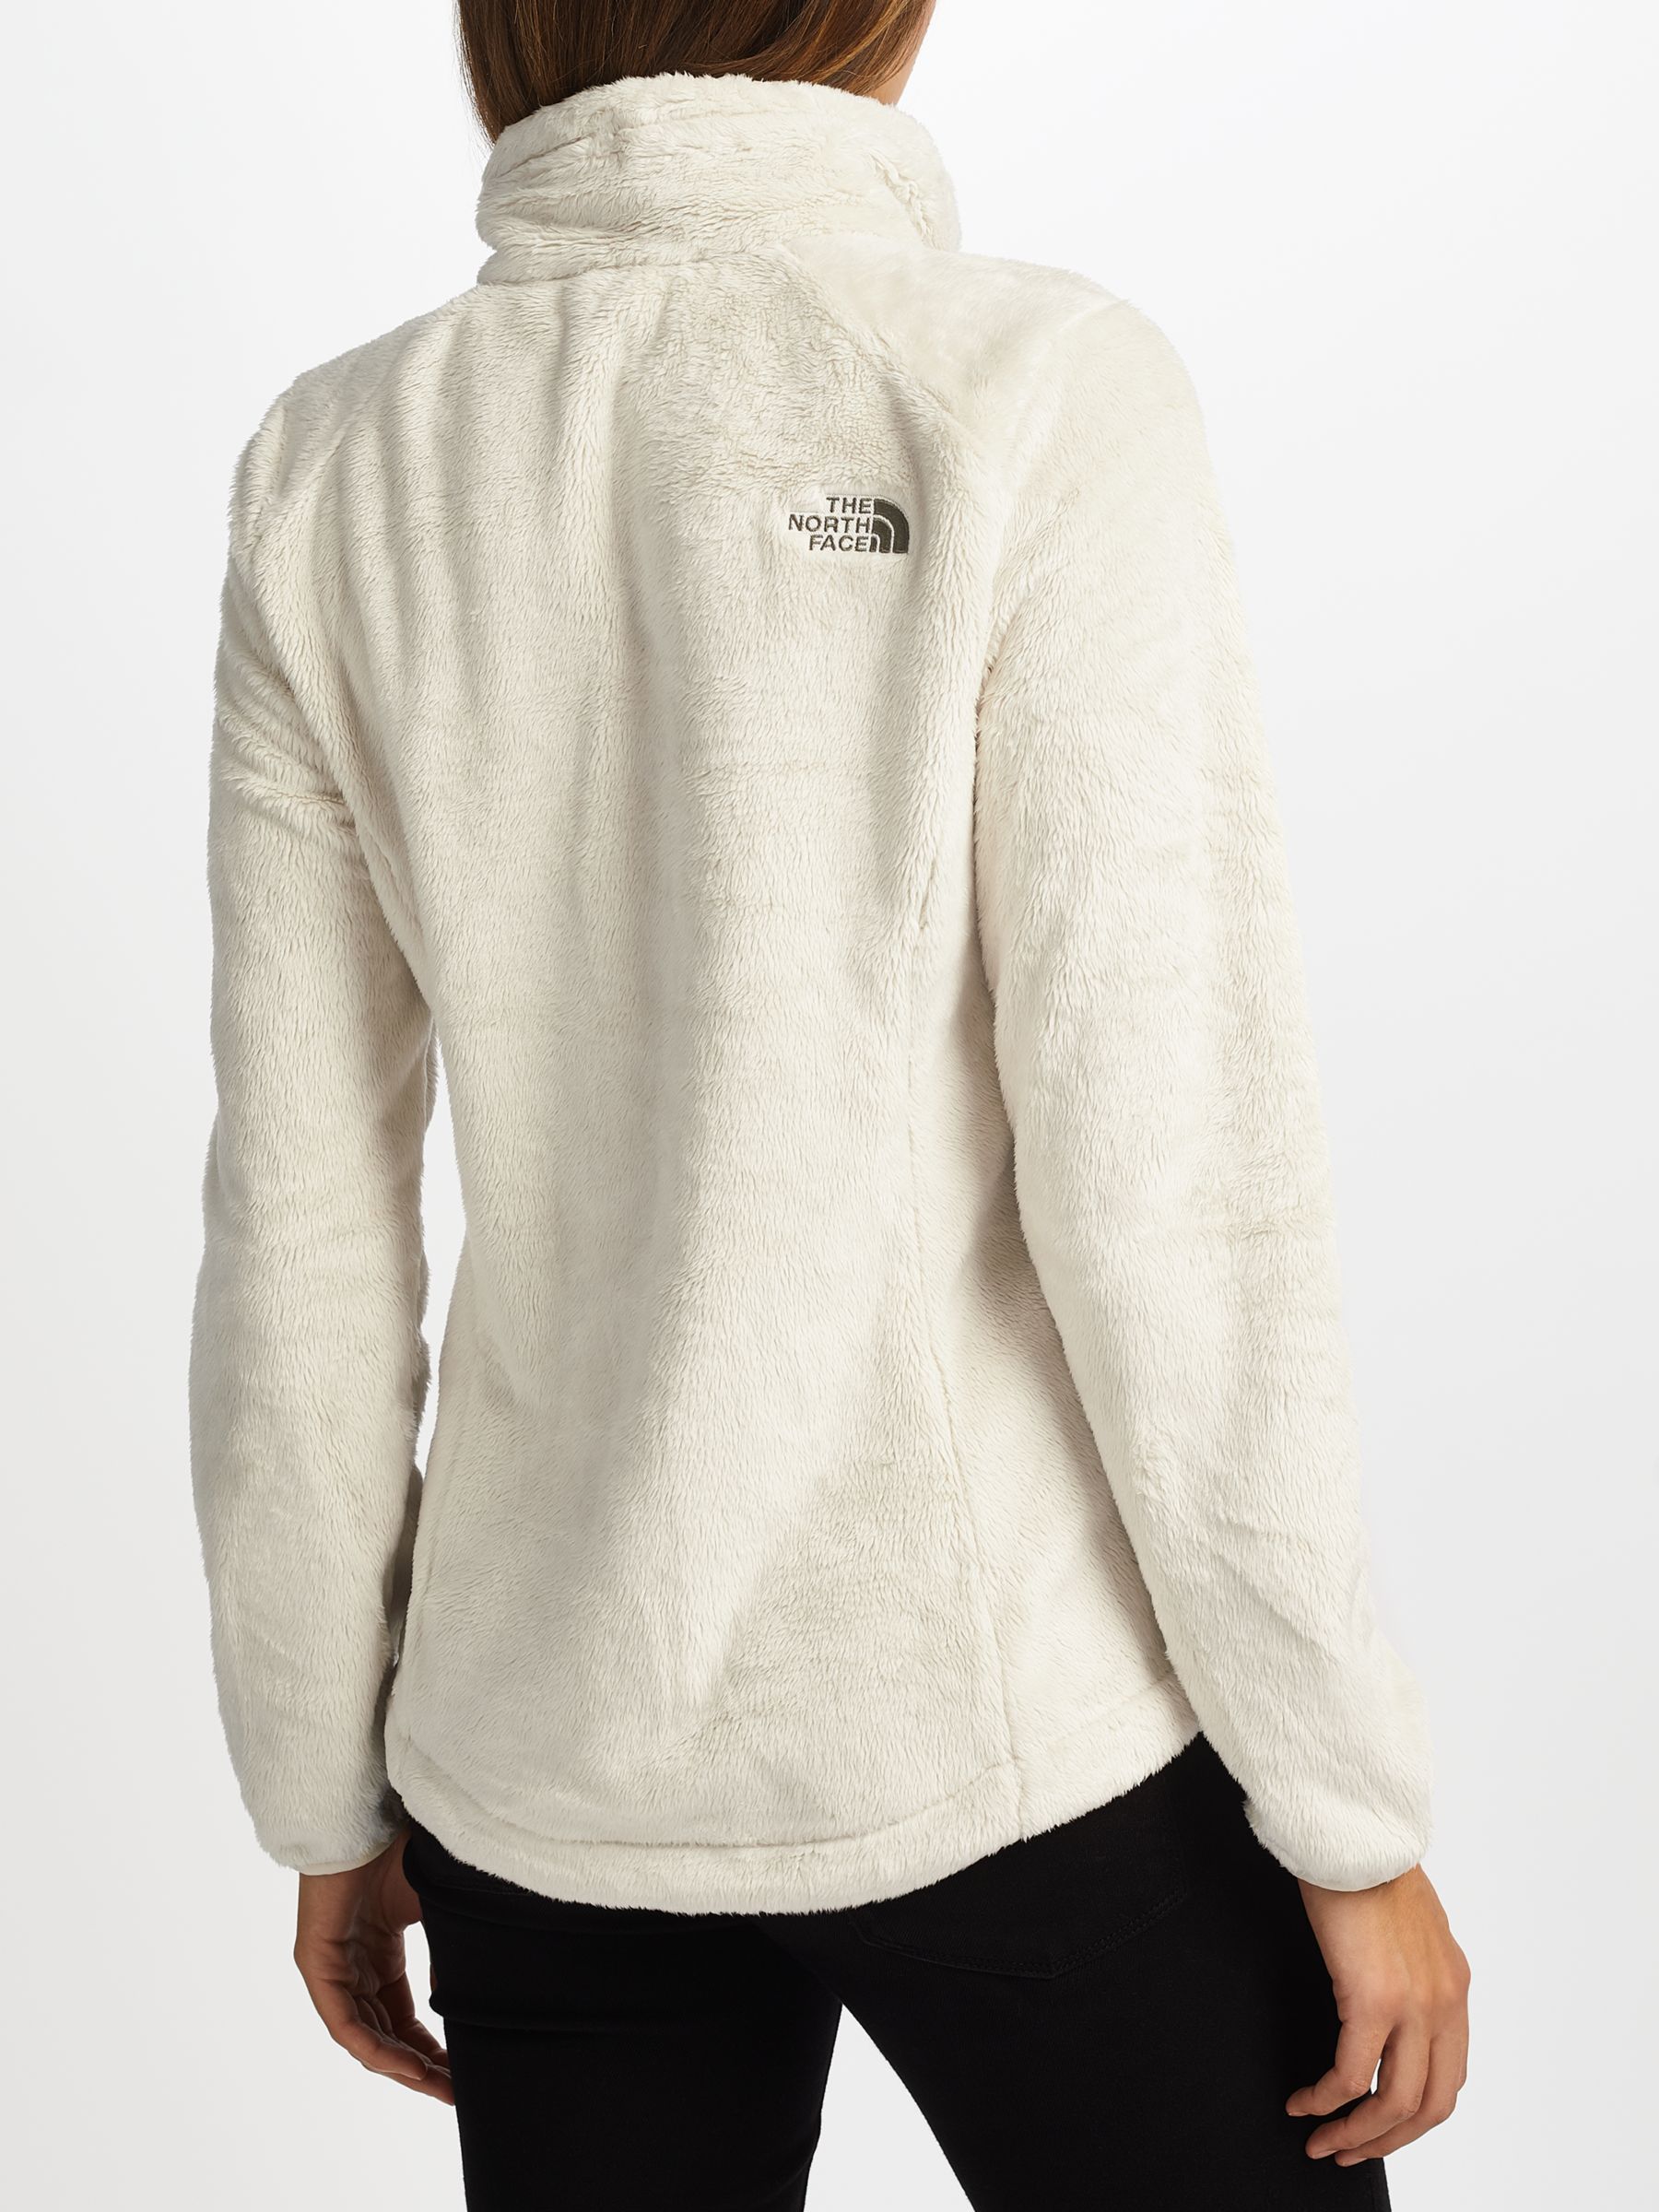 The North Face Osito fleece jacket in white